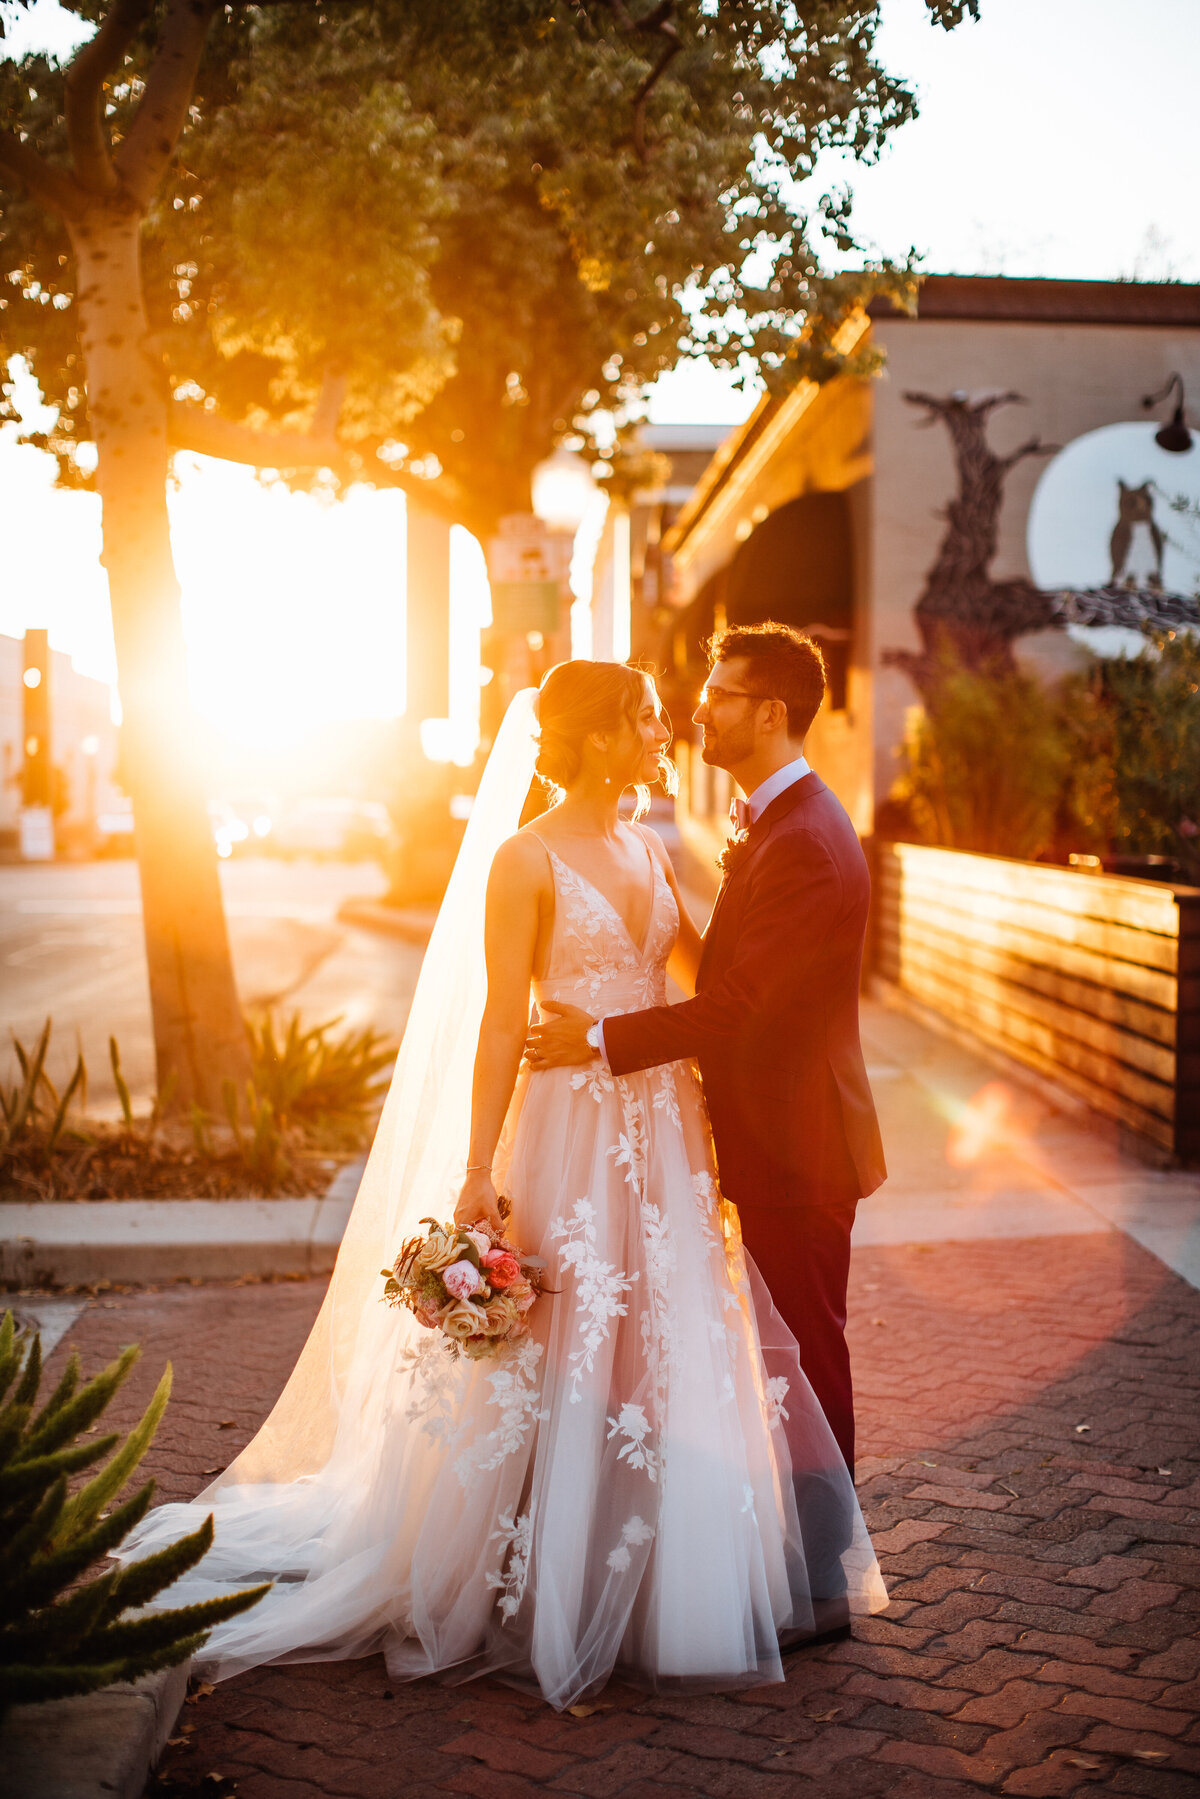 Archer Inspired Photography - Kayleigh and Emmanuel Wedding - Fullerton CA-583